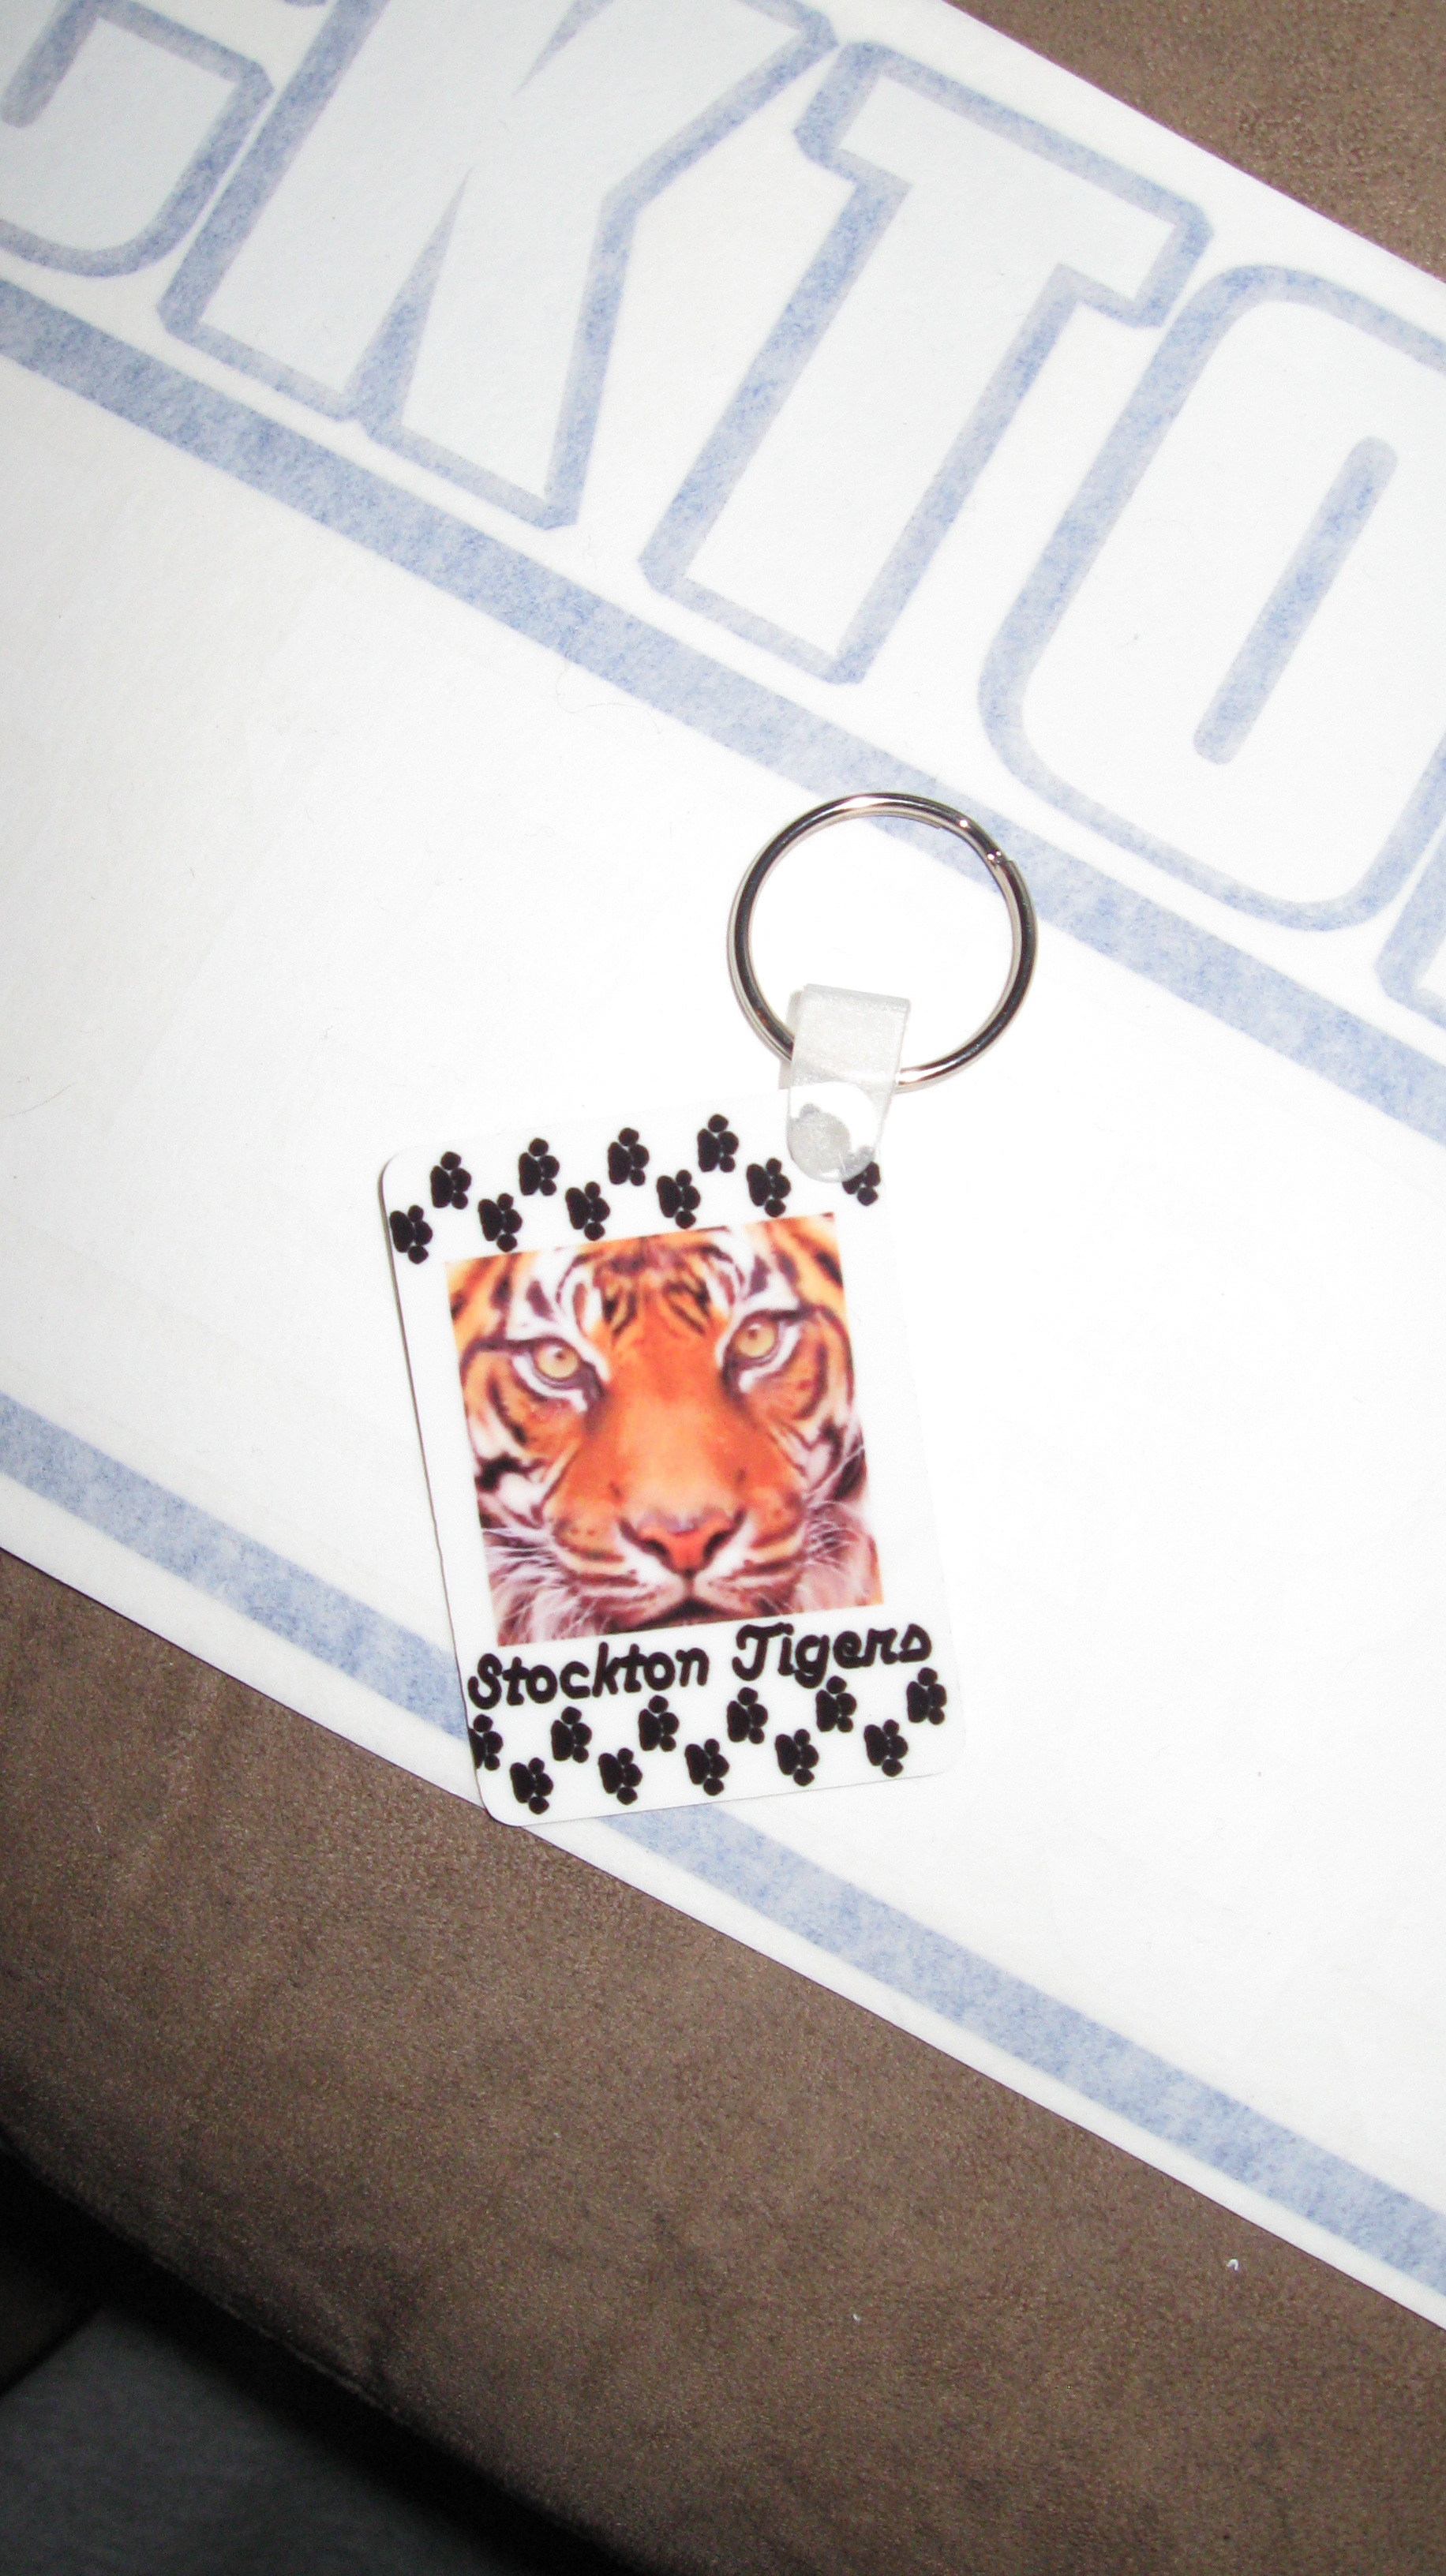 KeyChains made with sublimation printing